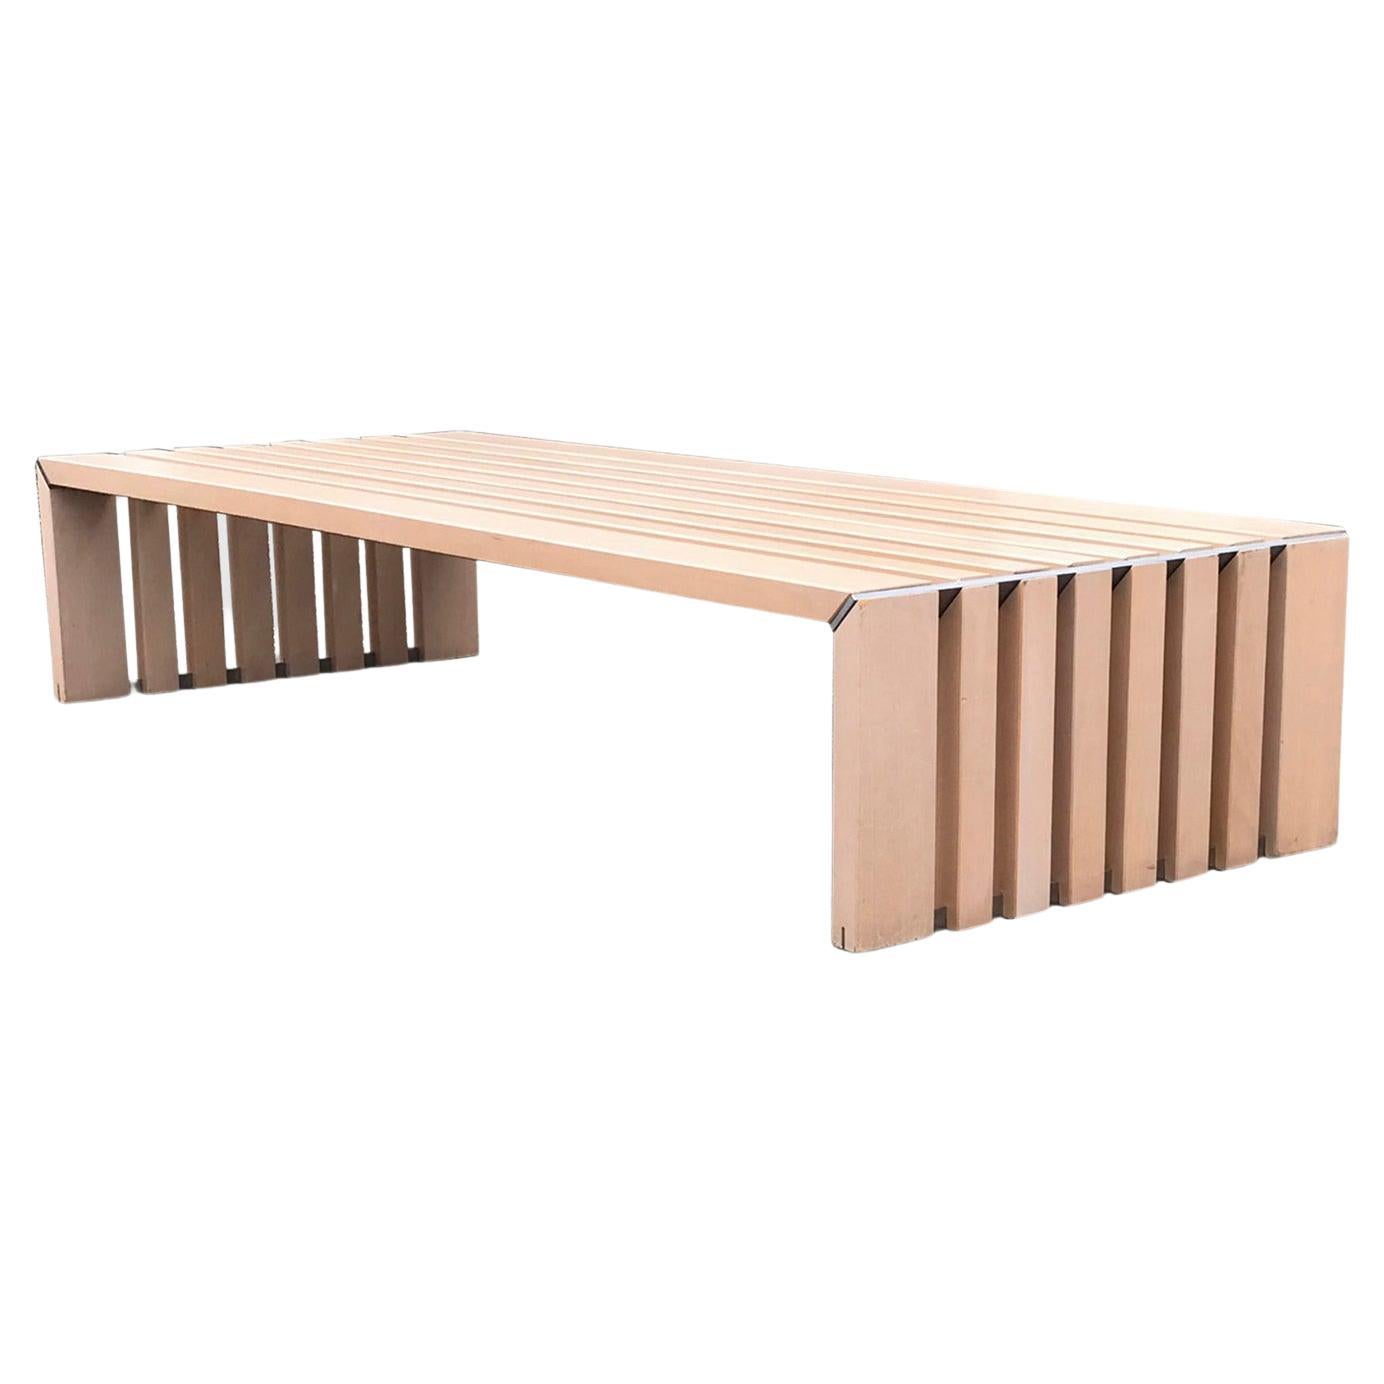 Passe Partout slatted ash bench by Walter Antonis for Arspect 1970s For Sale